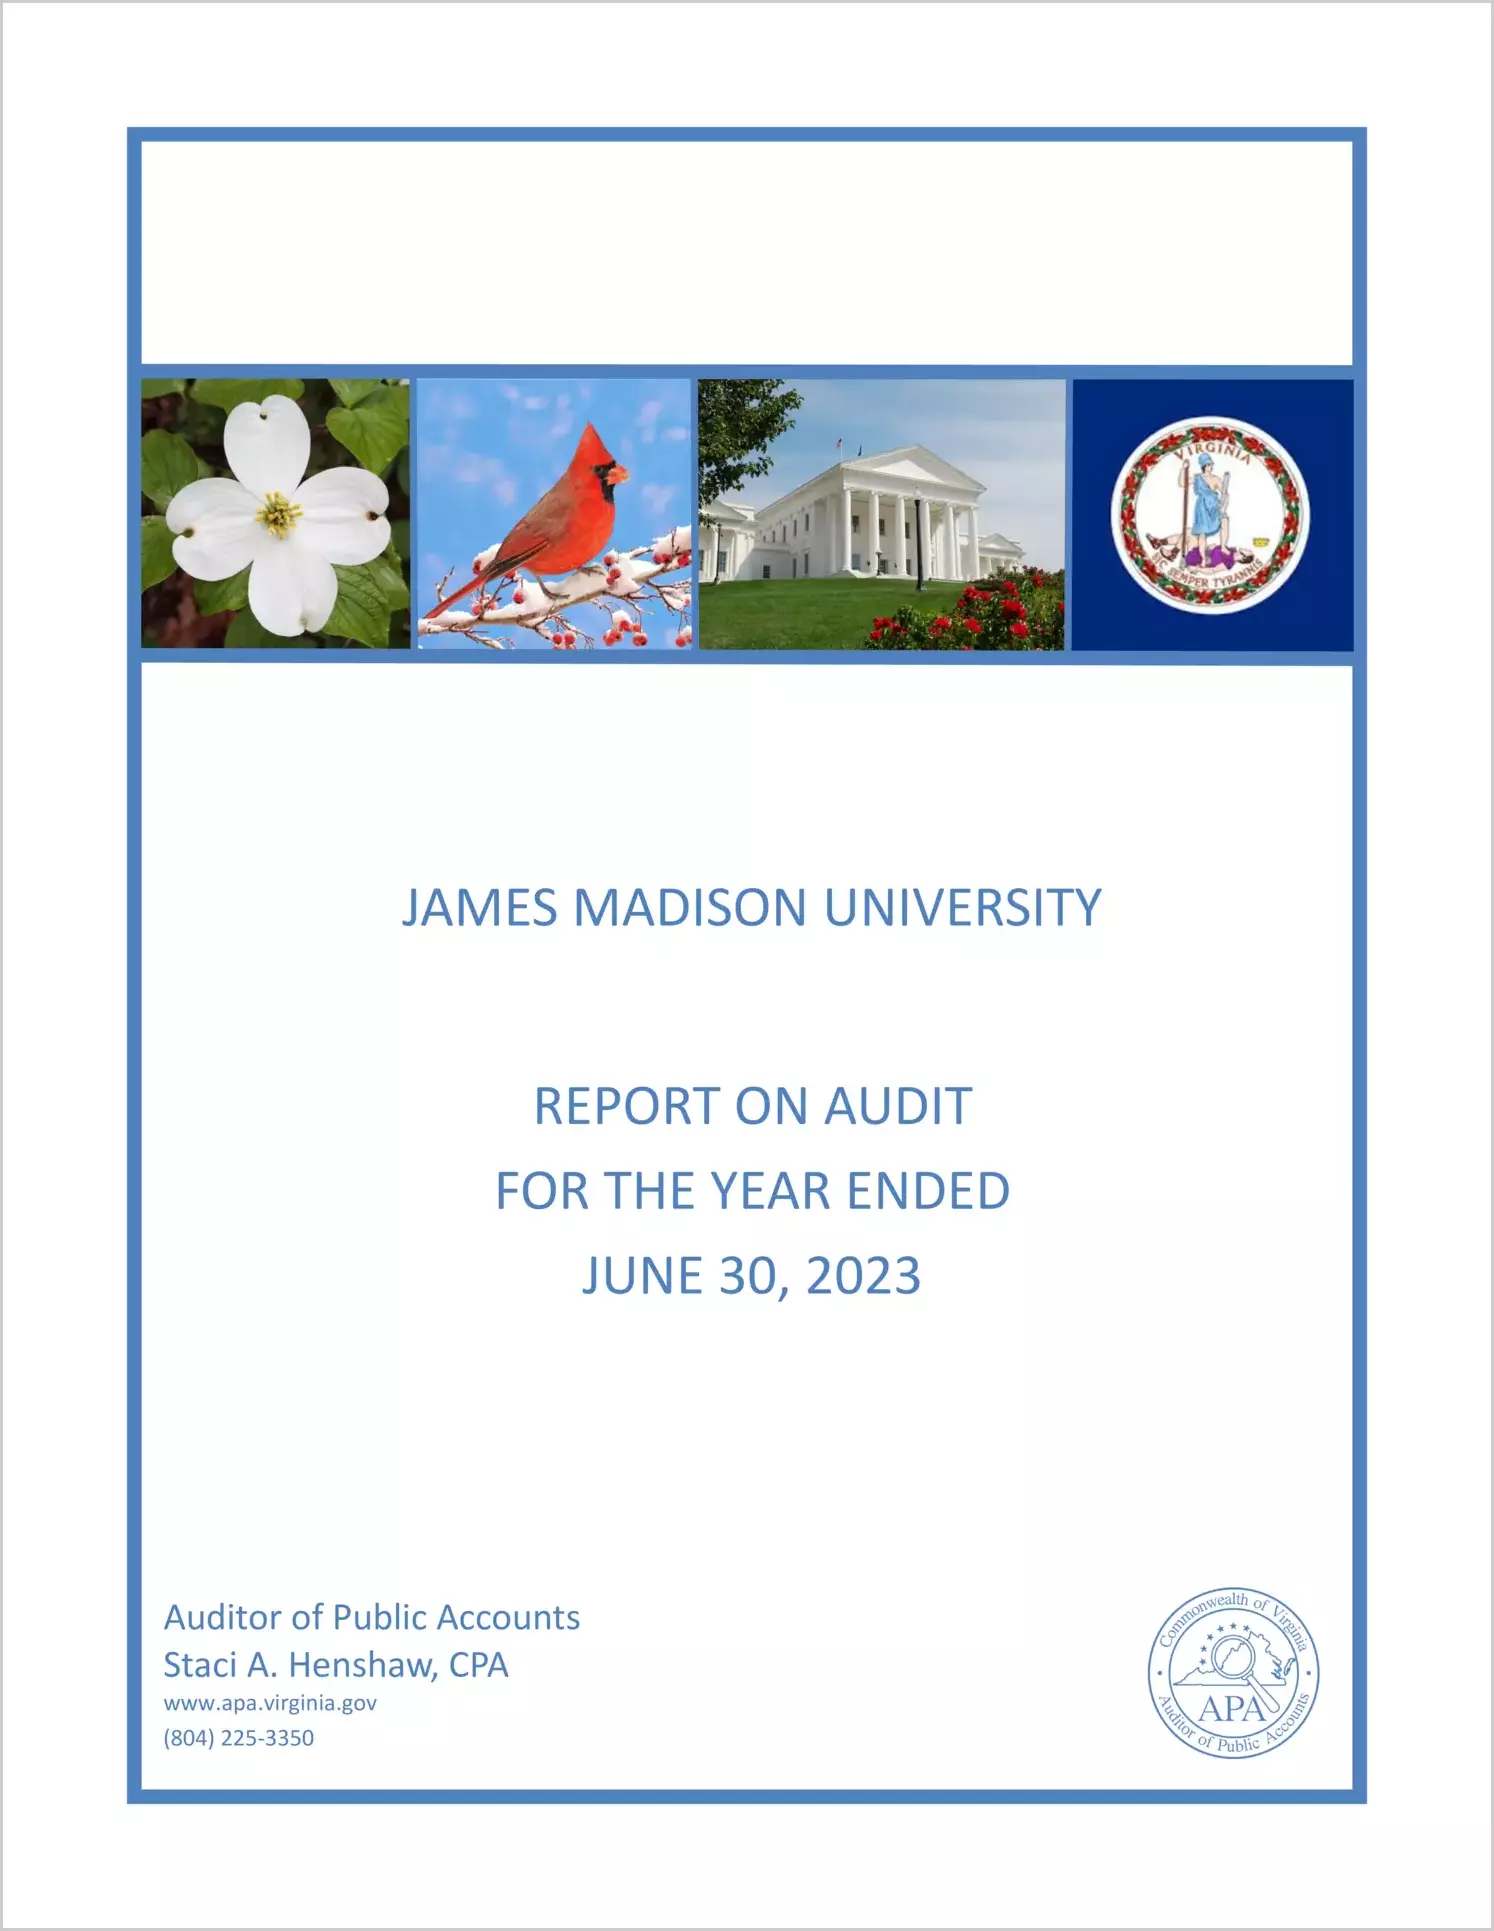 James Madison University for the year ended June 30, 2023